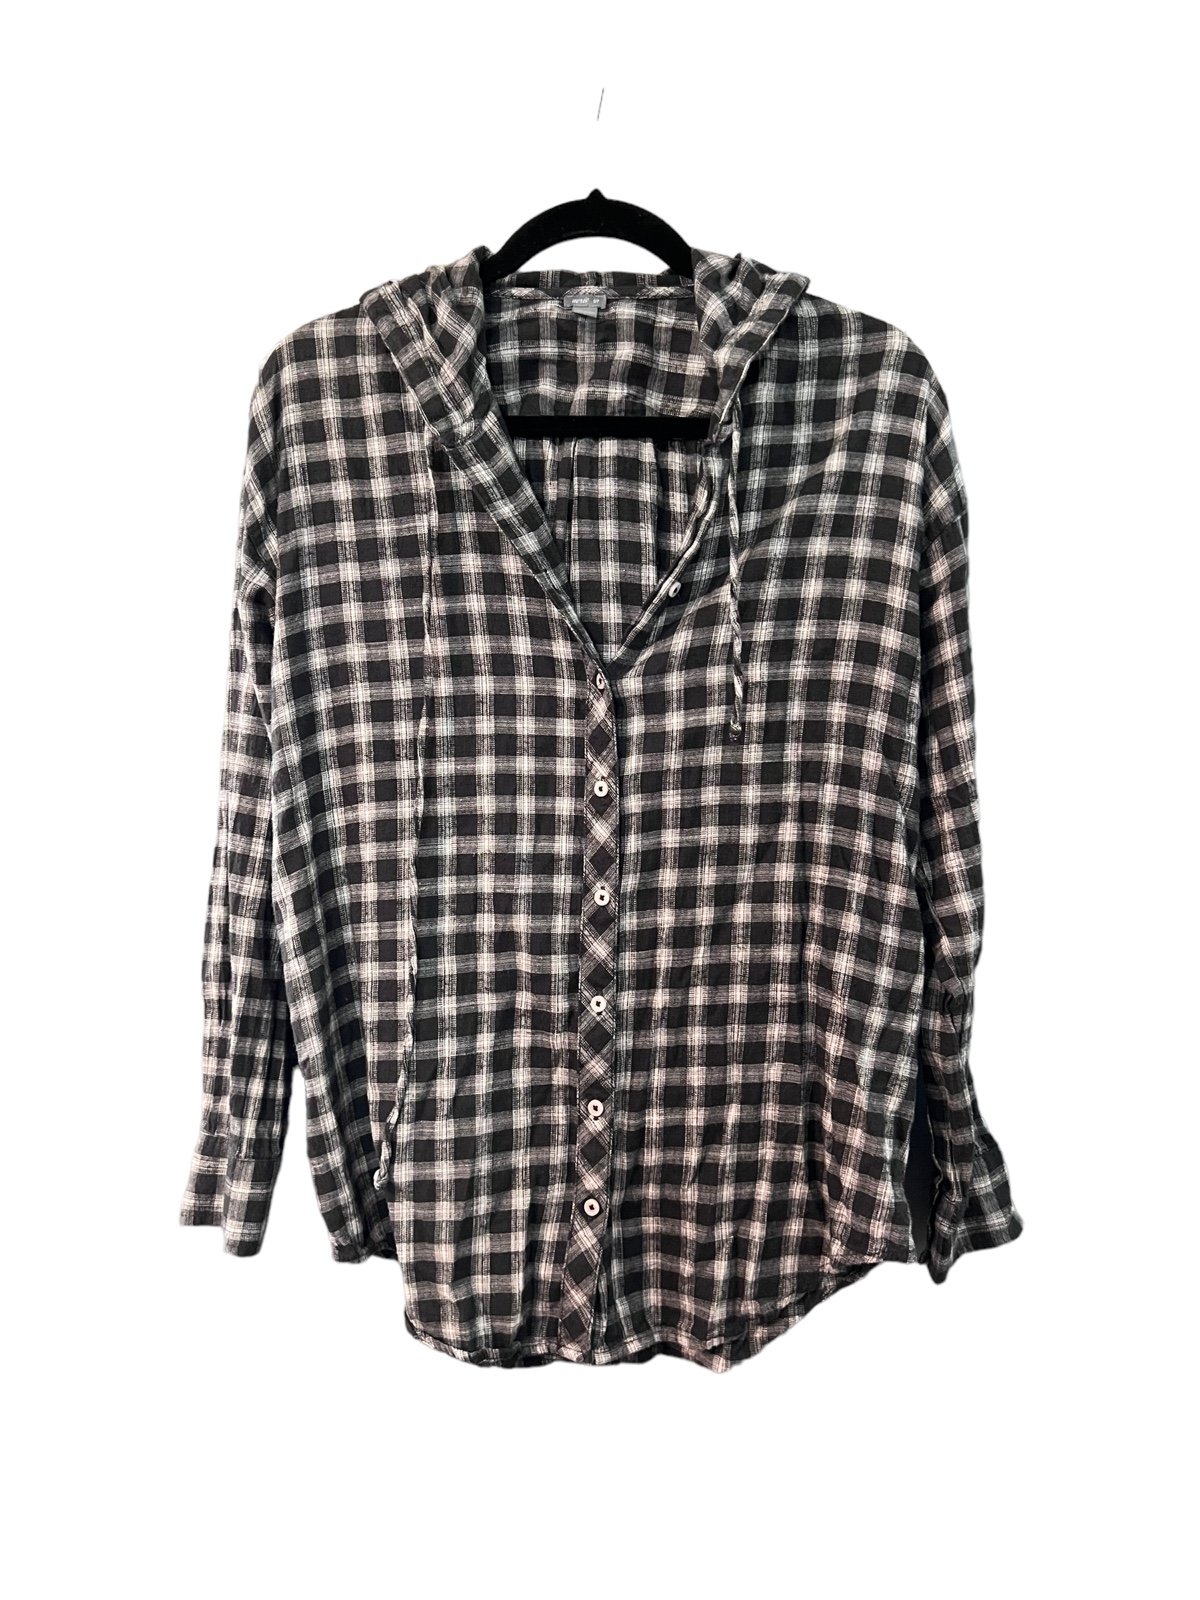 Special offer  American Eagle White and Black Plaid Hoo